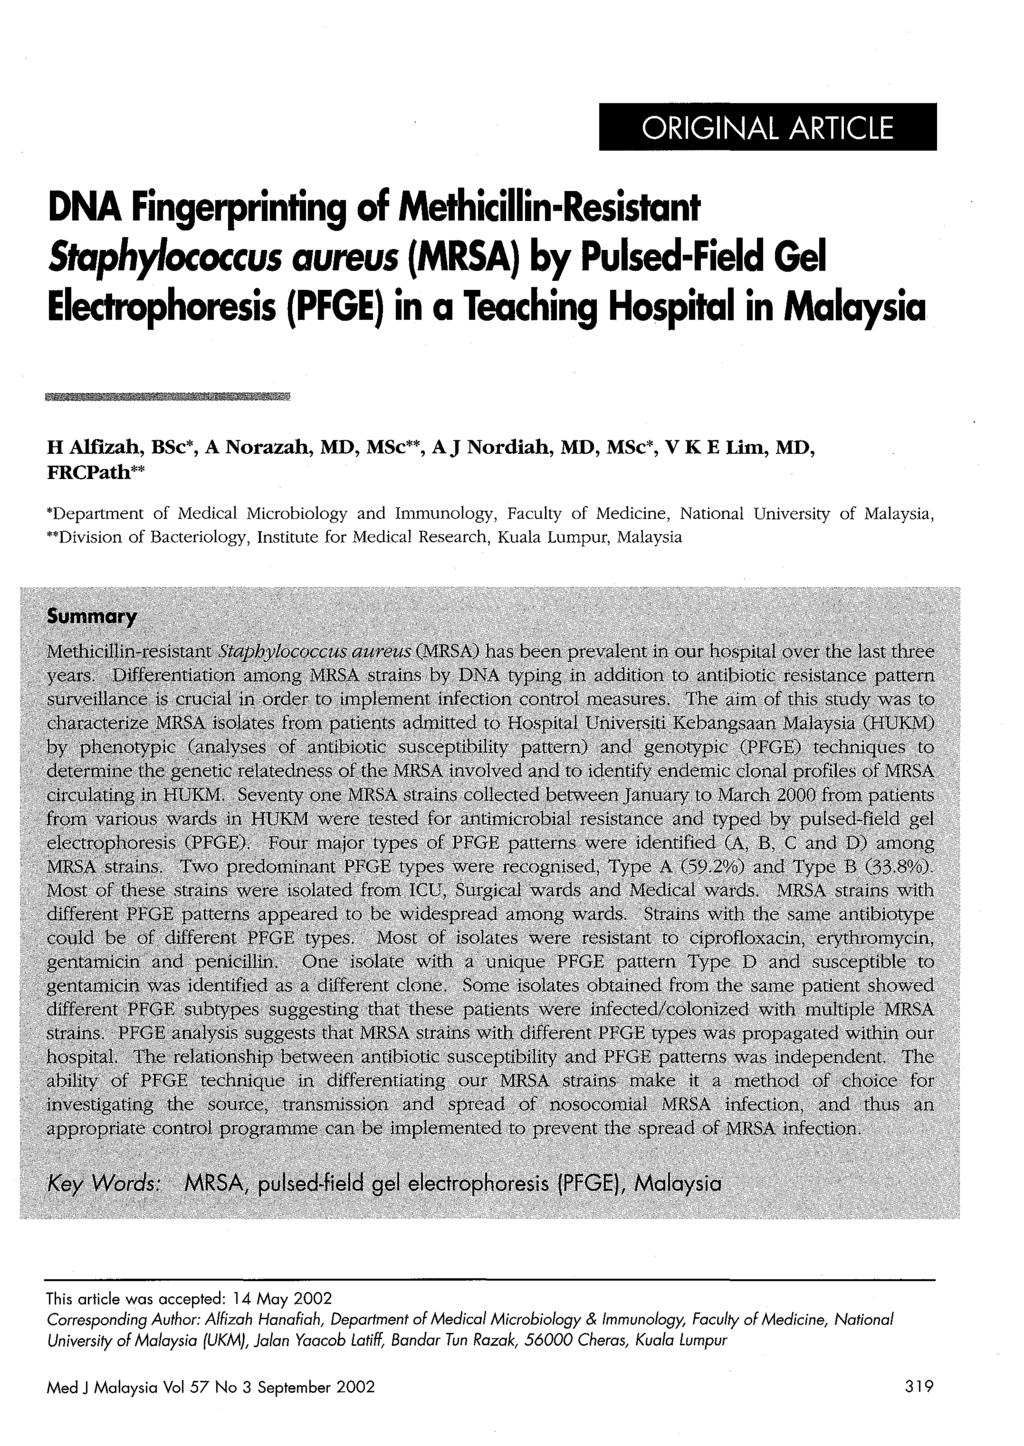 ORIGINAL ARTICLE DNA Fingerprinting of Methicillin-Resistant Staphylococcus aureus (MRSA) by Pulsed-Field Gel Electrophoresis (PFGE) in a Teaching Hospital in Malaysia H AlIlZah, BSc*, A Norazah, MD,